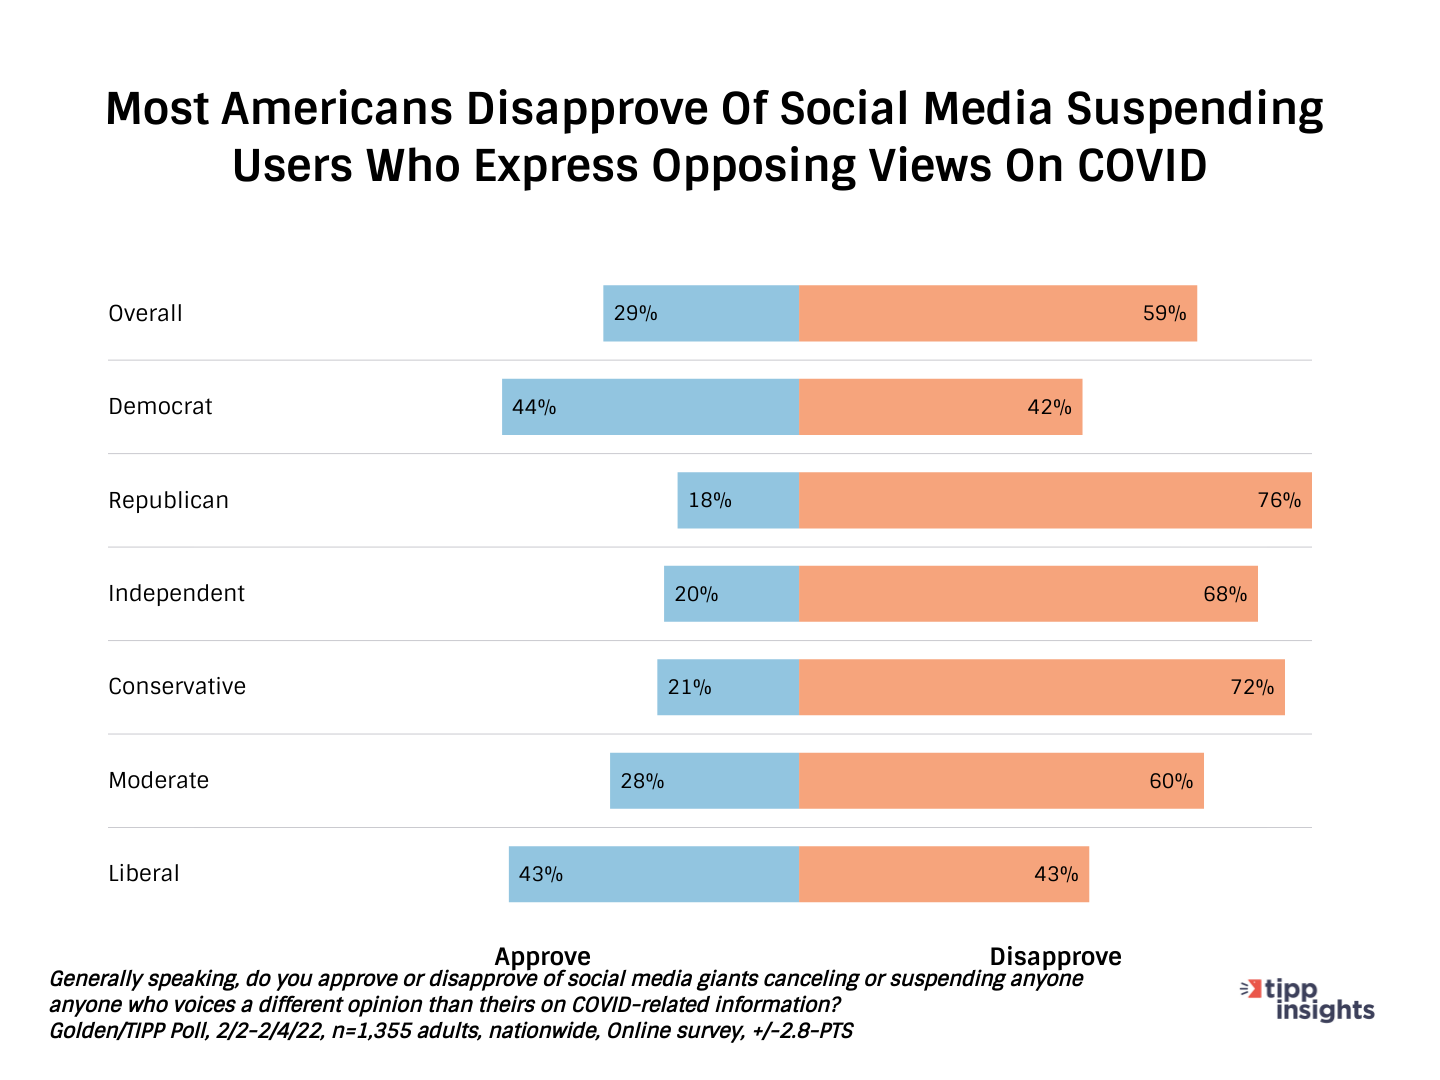 Golden/TIPP Poll: Most americans dissaprove of social media suspending users who express opposing views on COVID19